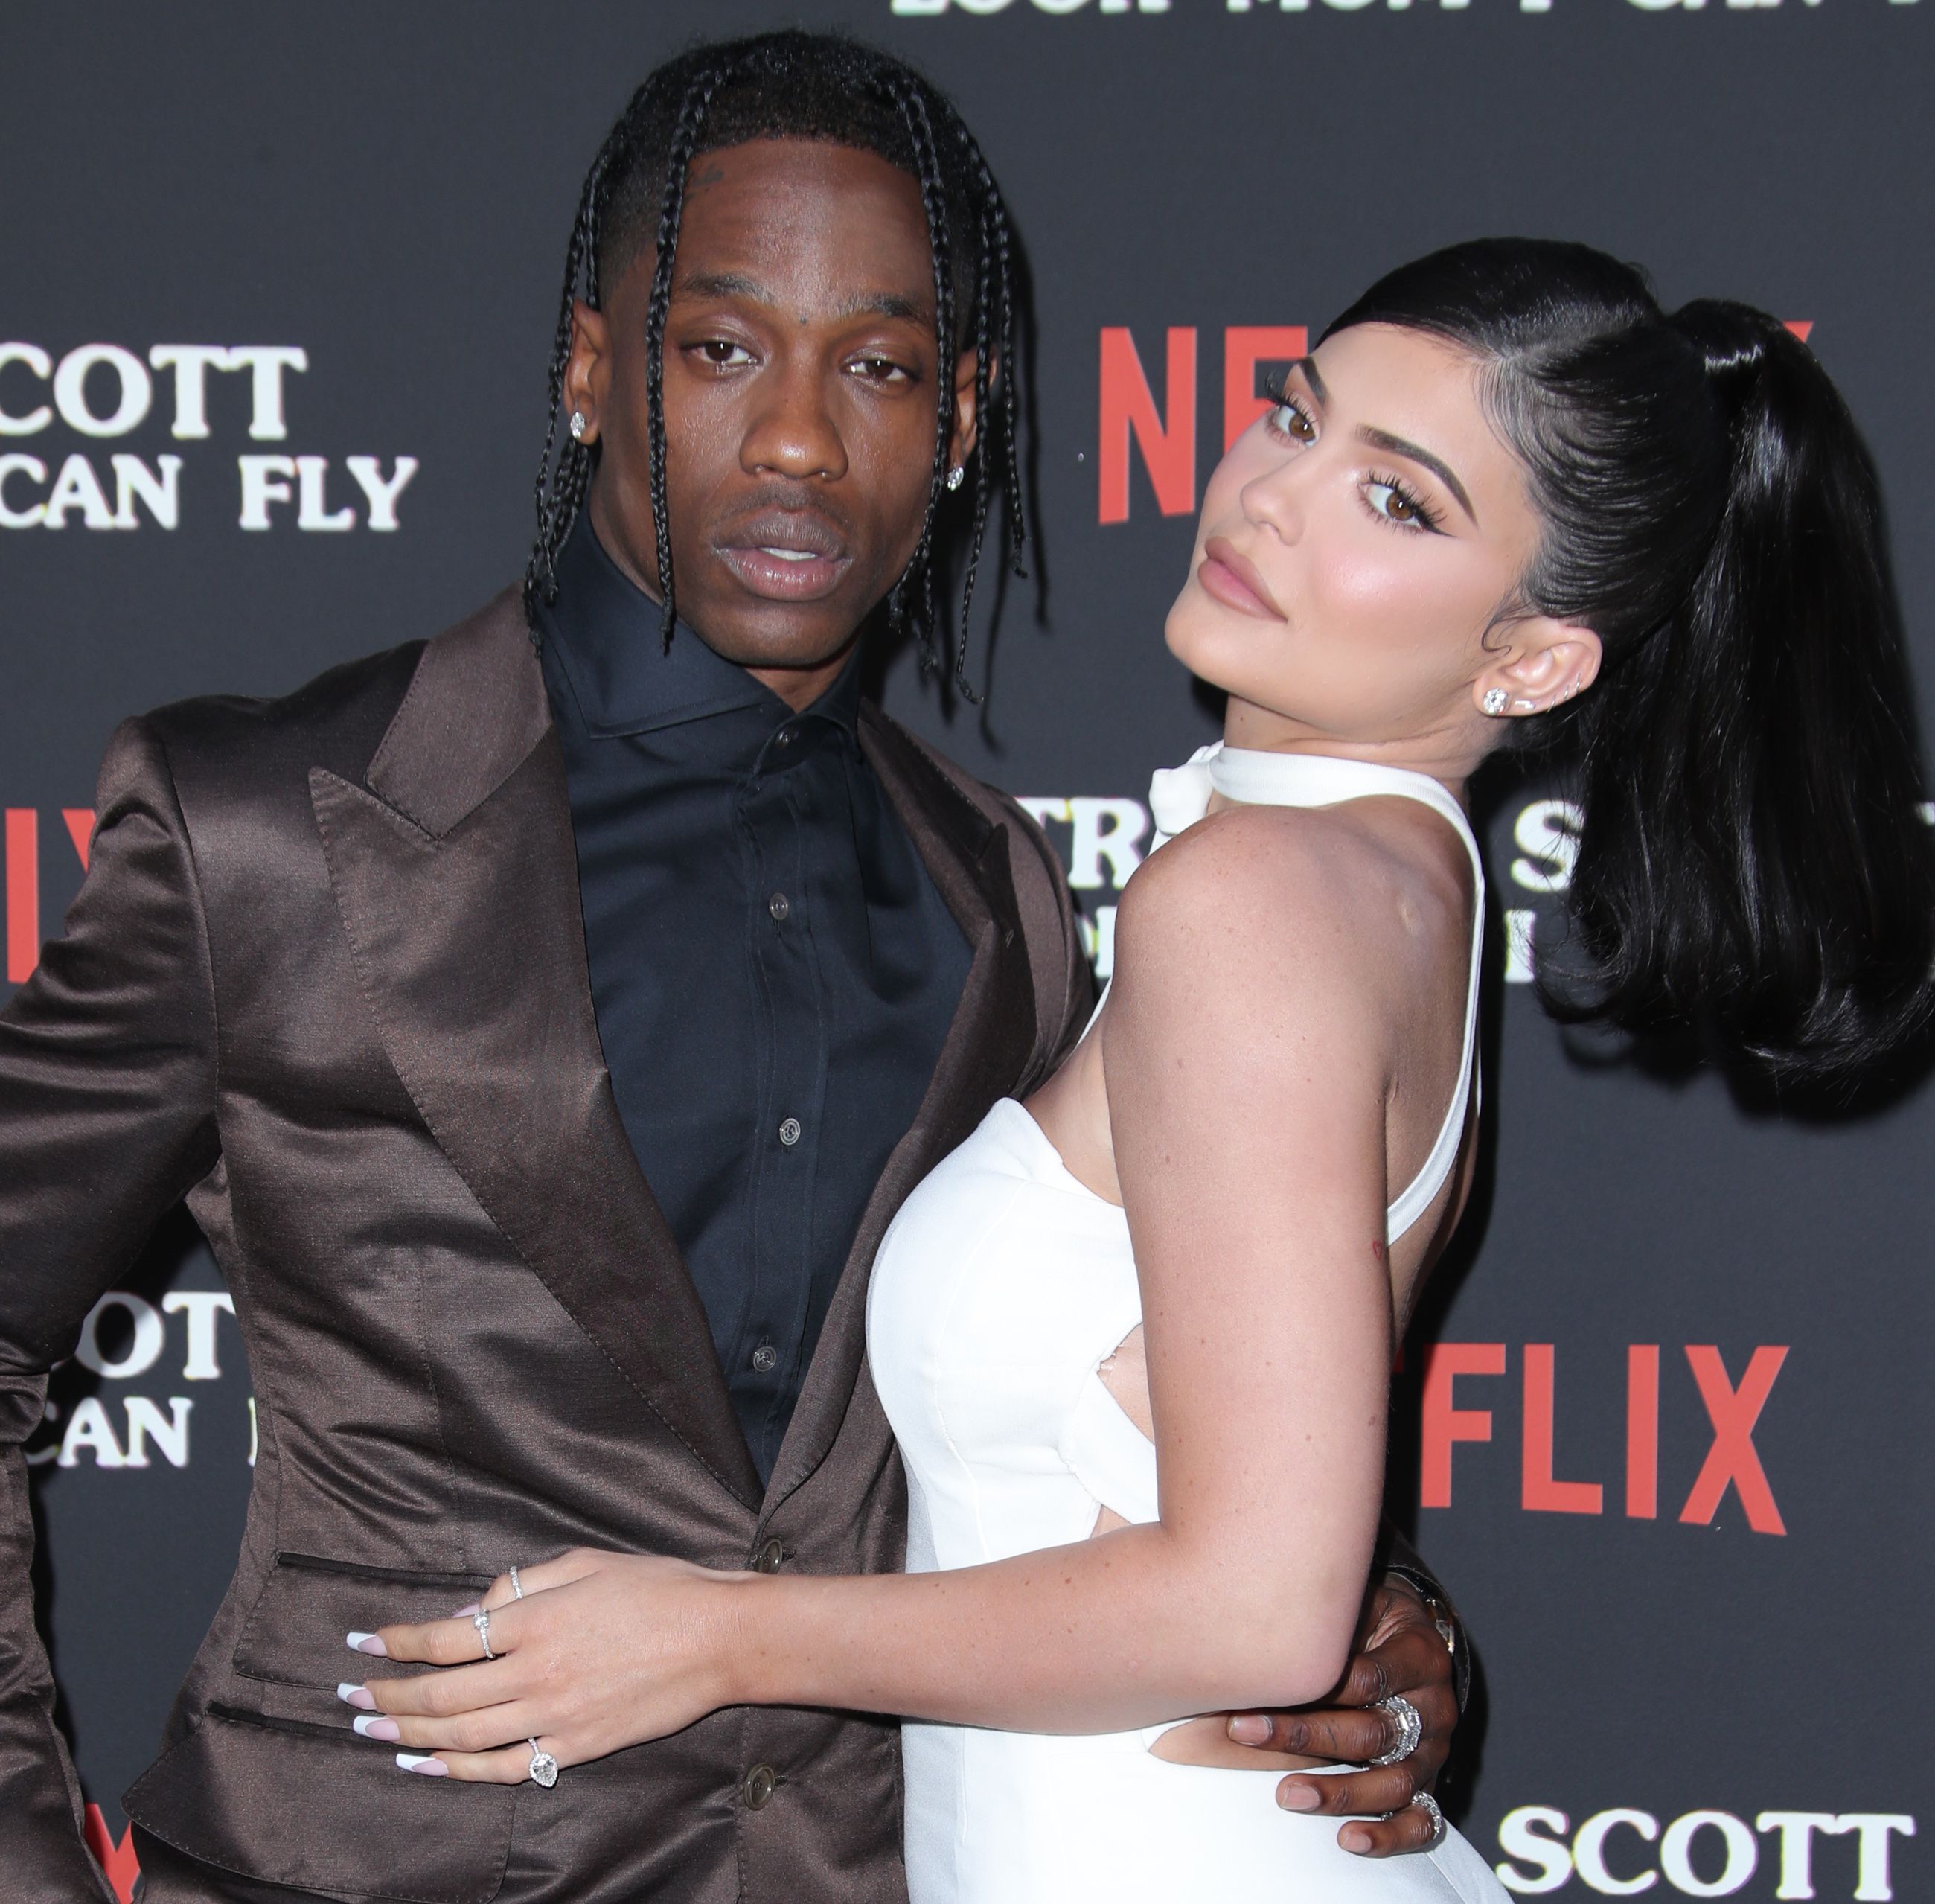 <p>In early 2019, <a href="https://www.wonderwall.com/celebrity/profiles/overview/kylie-jenner-1413.article">Kylie Jenner</a>'s relationship with Travis Scott hit a major speed bump when she reportedly <a href="https://www.wonderwall.com/celebrity/photos/icymi-celeb-news-feb-24-march-2-2019-ed-sheeran-secret-wedding-luke-perry-stroke-ryan-seacrest-single-more-3018607.gallery">accused him of cheating</a> after discovering inappropriate DMs with other women on his phone. (He "strongly denied" any infidelity.) Though the duo briefly worked through their differences, they ultimately <a href="https://www.wonderwall.com/celebrity/couples/kylie-jenner-travis-scott-breakup-celeb-love-life-news-late-september-early-october-2019-hollywood-romance-report-3021236.gallery">called it quits</a> in the fall amid her ongoing trust issues and <a href="https://www.wonderwall.com/news/super-relatable-reason-kylie-jenner-and-travis-scott-broke-3021245.article">their inability to reconcile their different lifestyles</a>.</p>